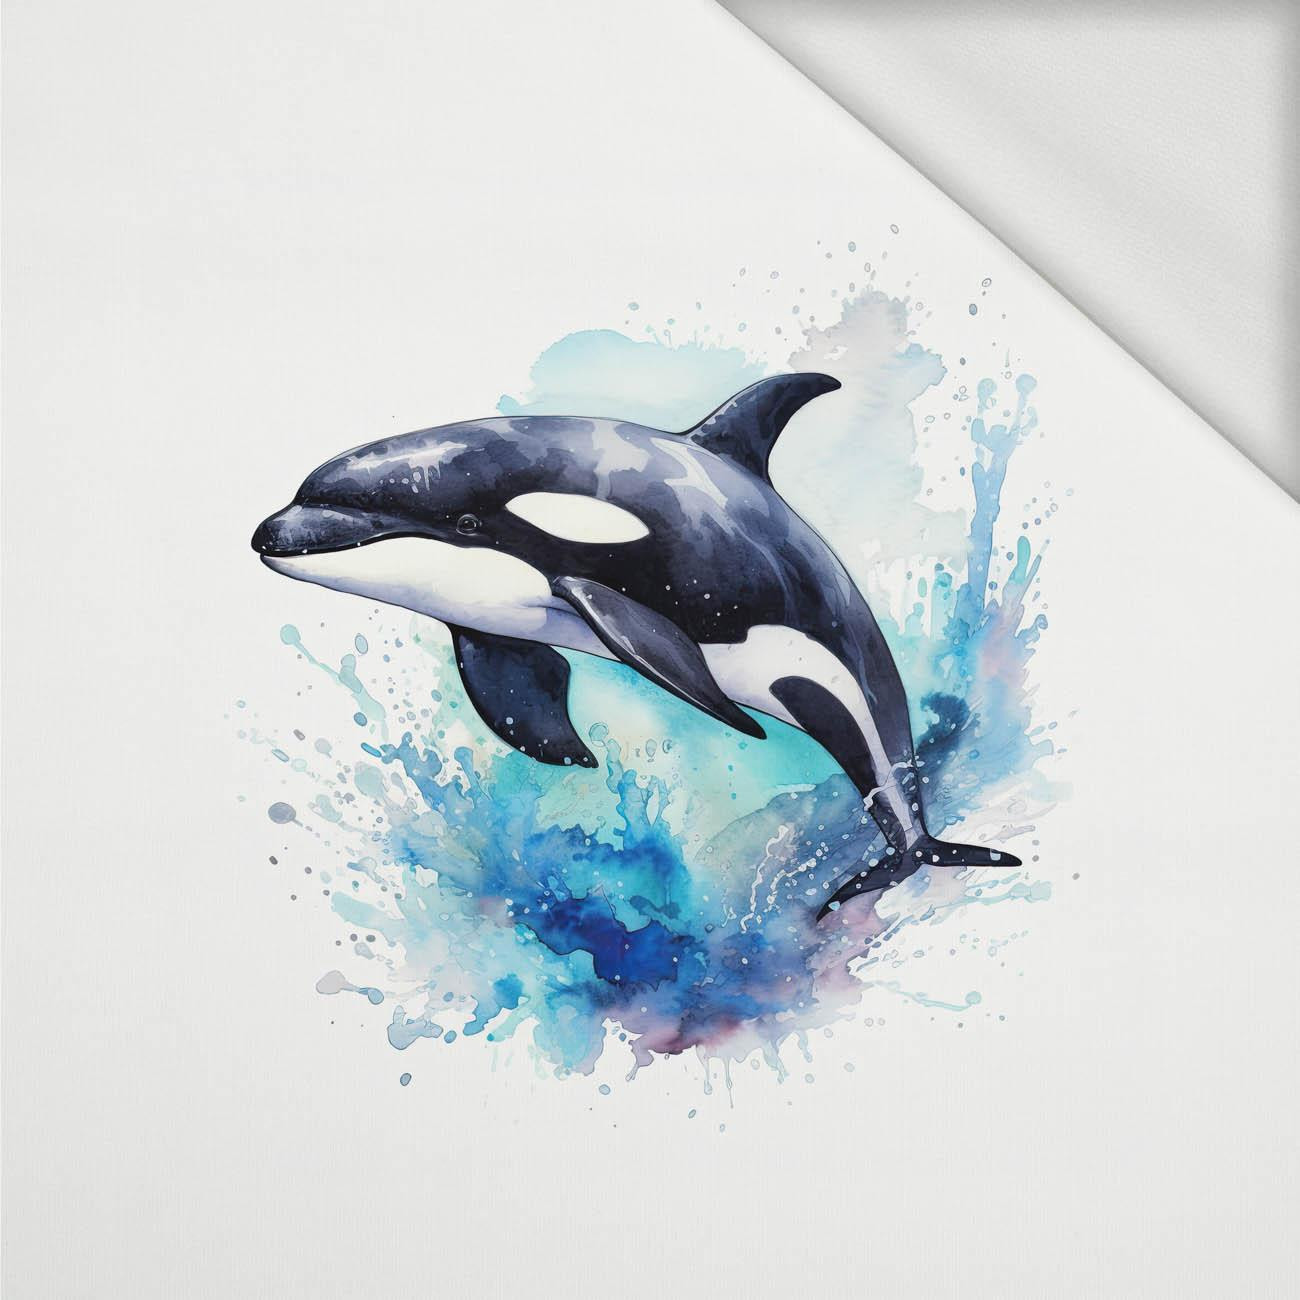 WATERCOLOR WHALE - Panel (75cm x 80cm) Sommersweat